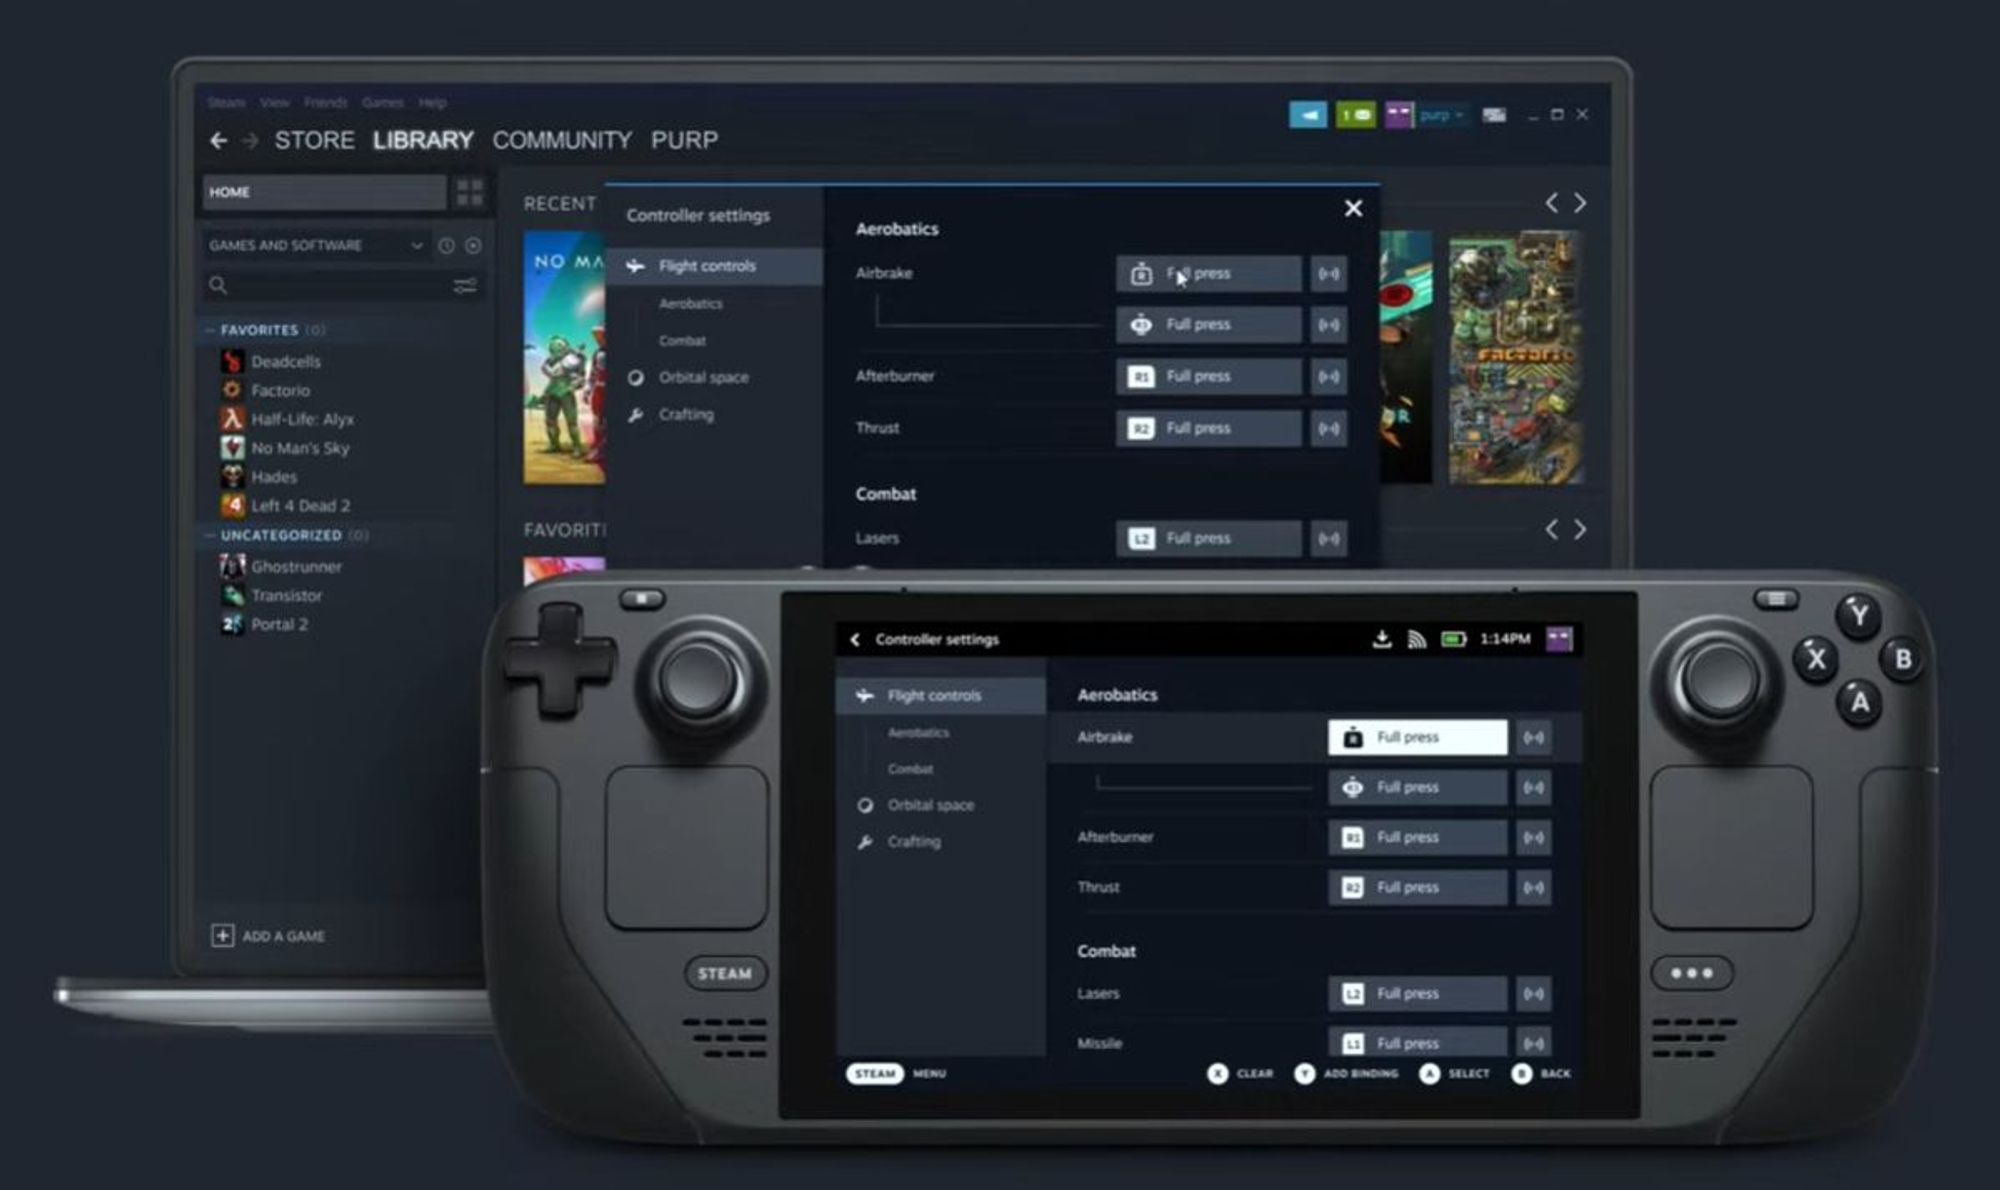 The Steam Deck is not a flop - The Verge